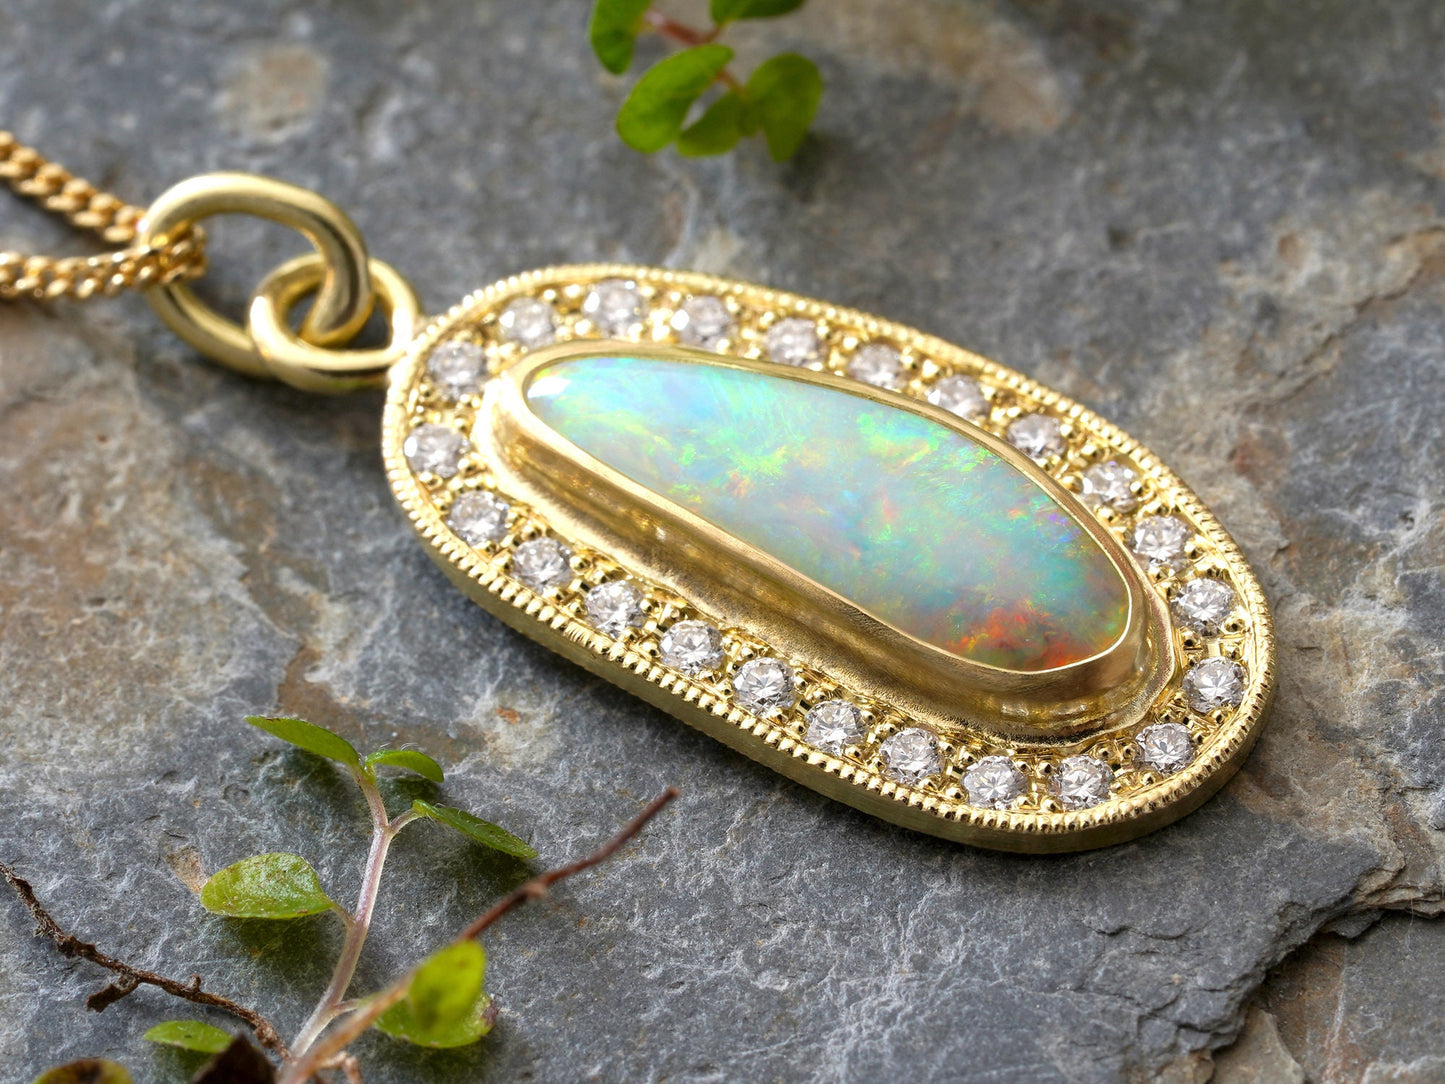 Opal Necklace with Diamonds in 18k Yellow Gold, One-Of-A-Kind White Opal Necklace in 18k Yellow Gold, Handmade Opal Necklace